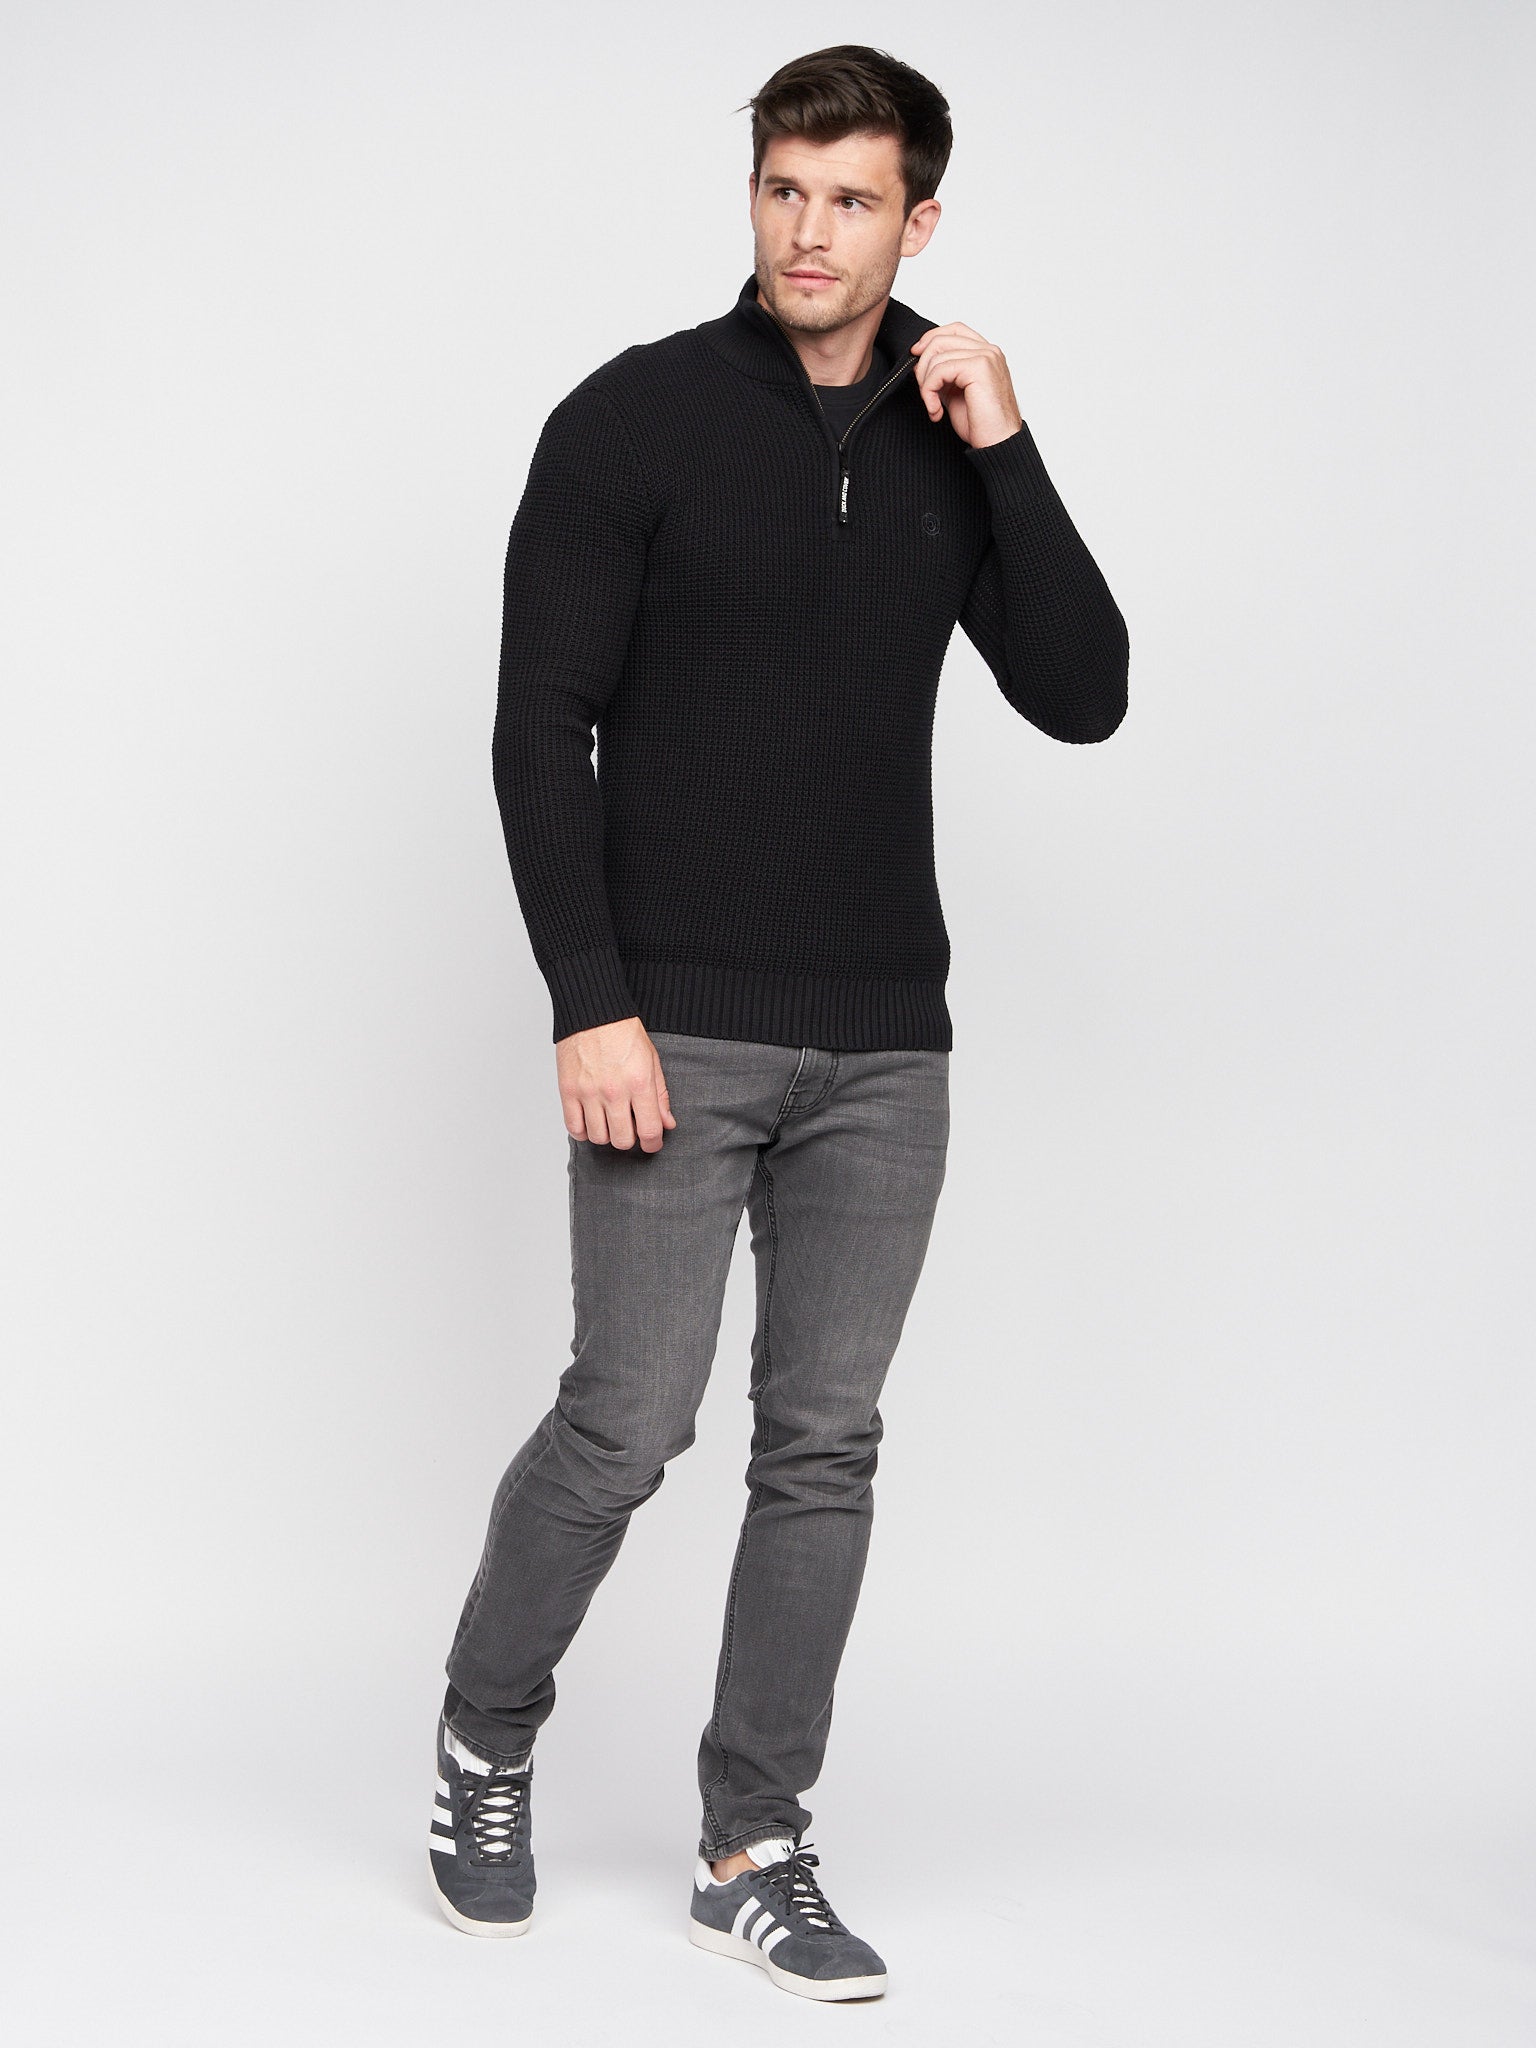 Duck & Cover - Mens Firegards 1/4 Zip Knit Black – Duck and Cover